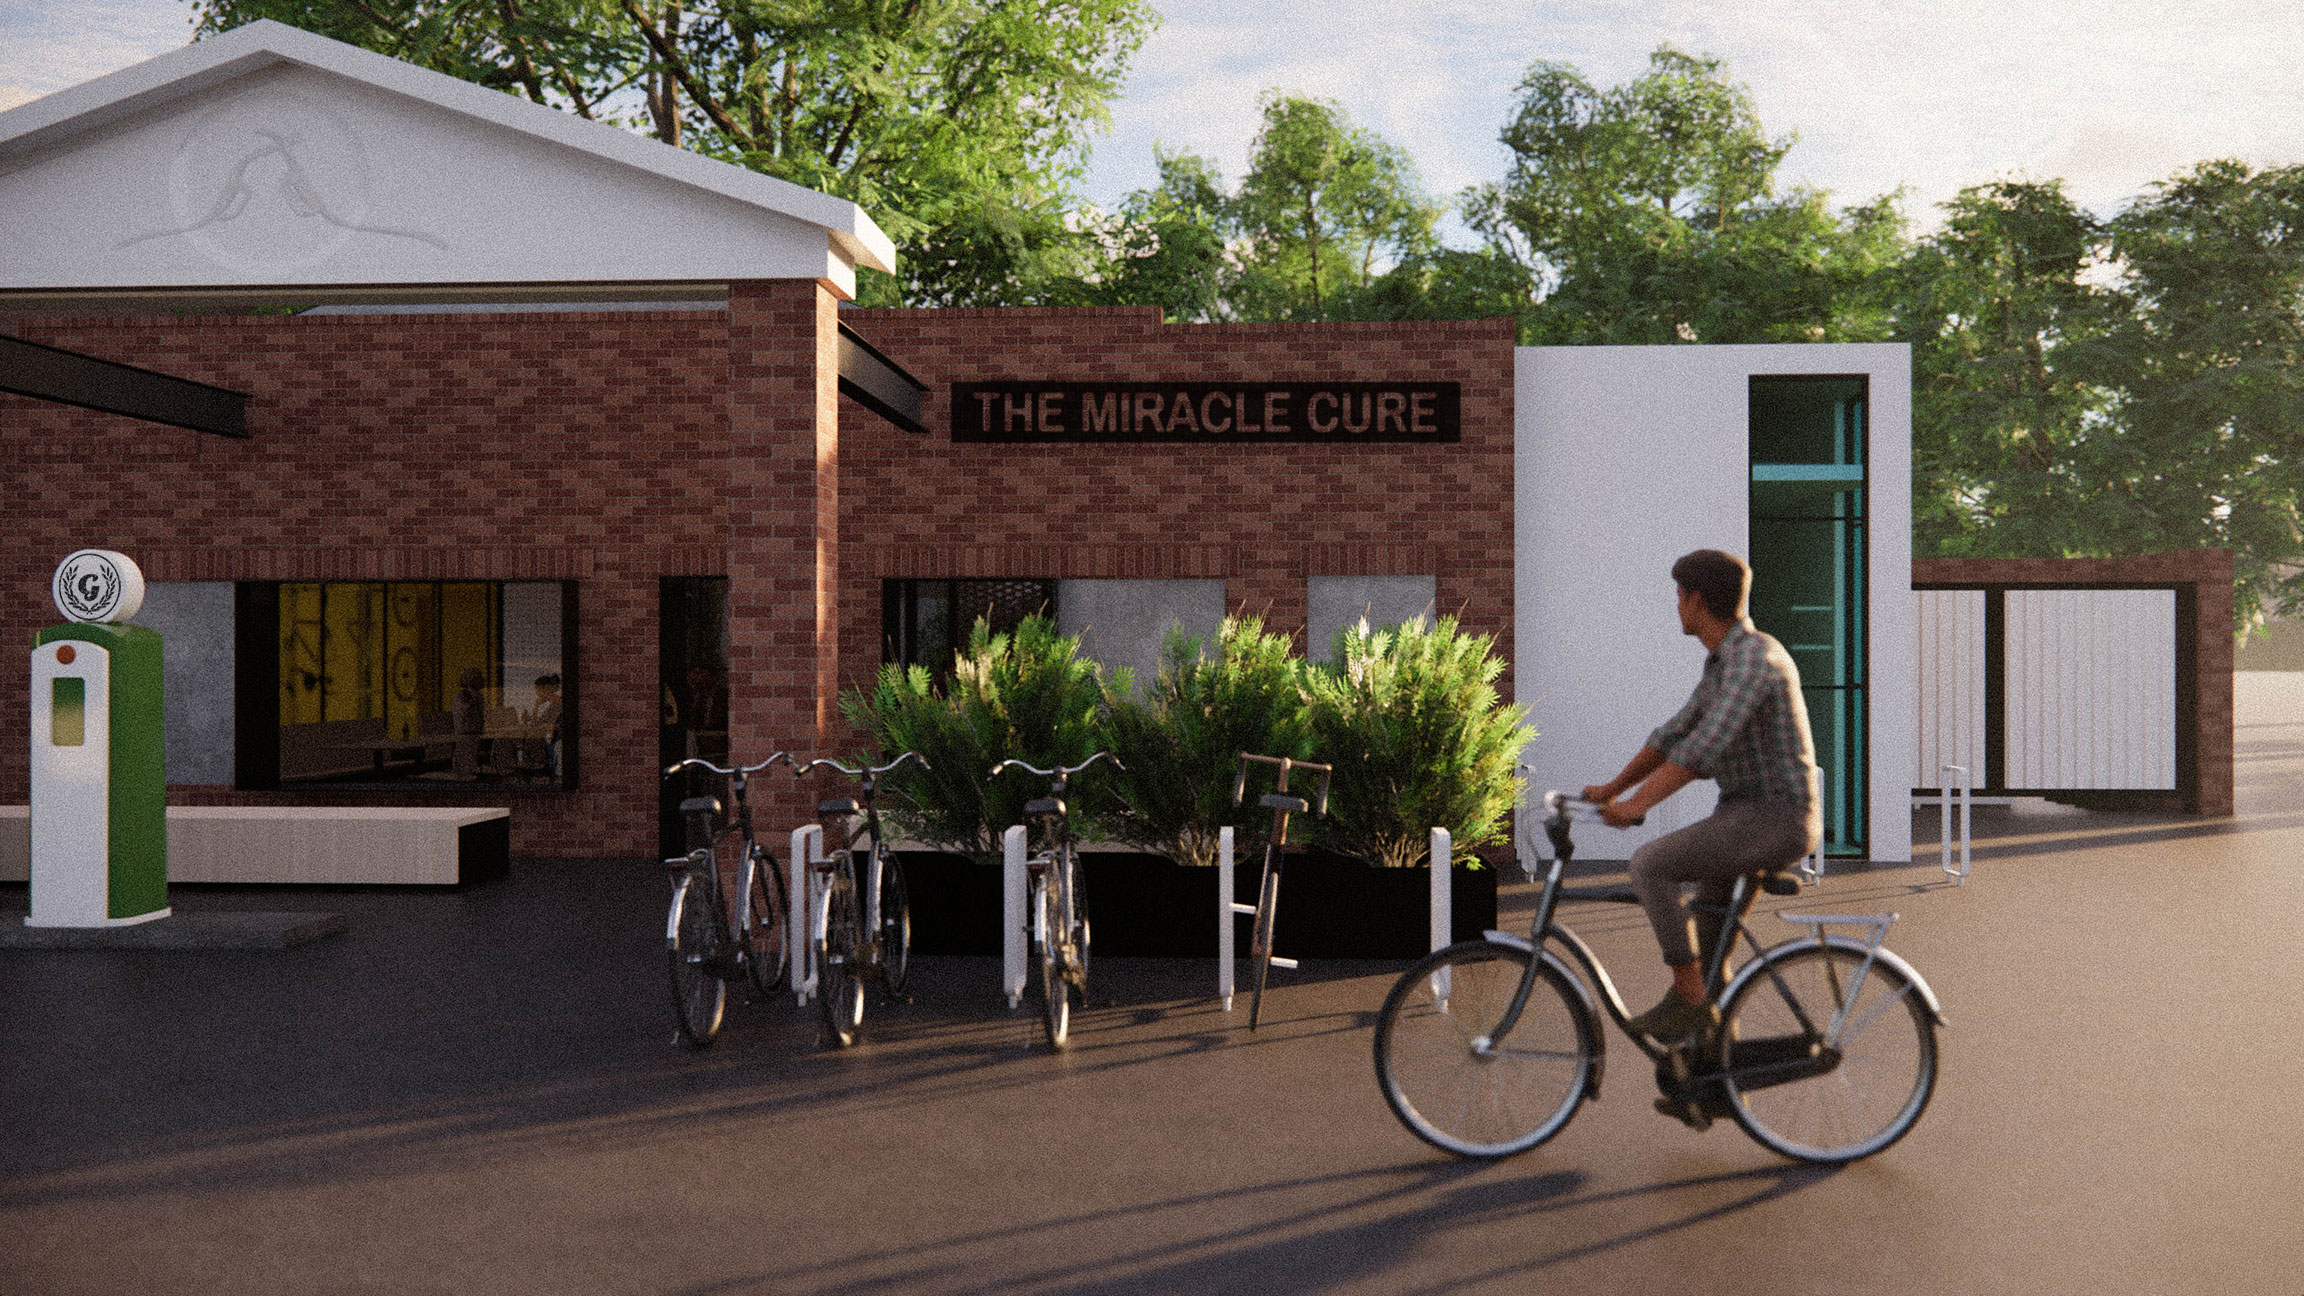 exterior view of the bike shop with a person riding by on a bike